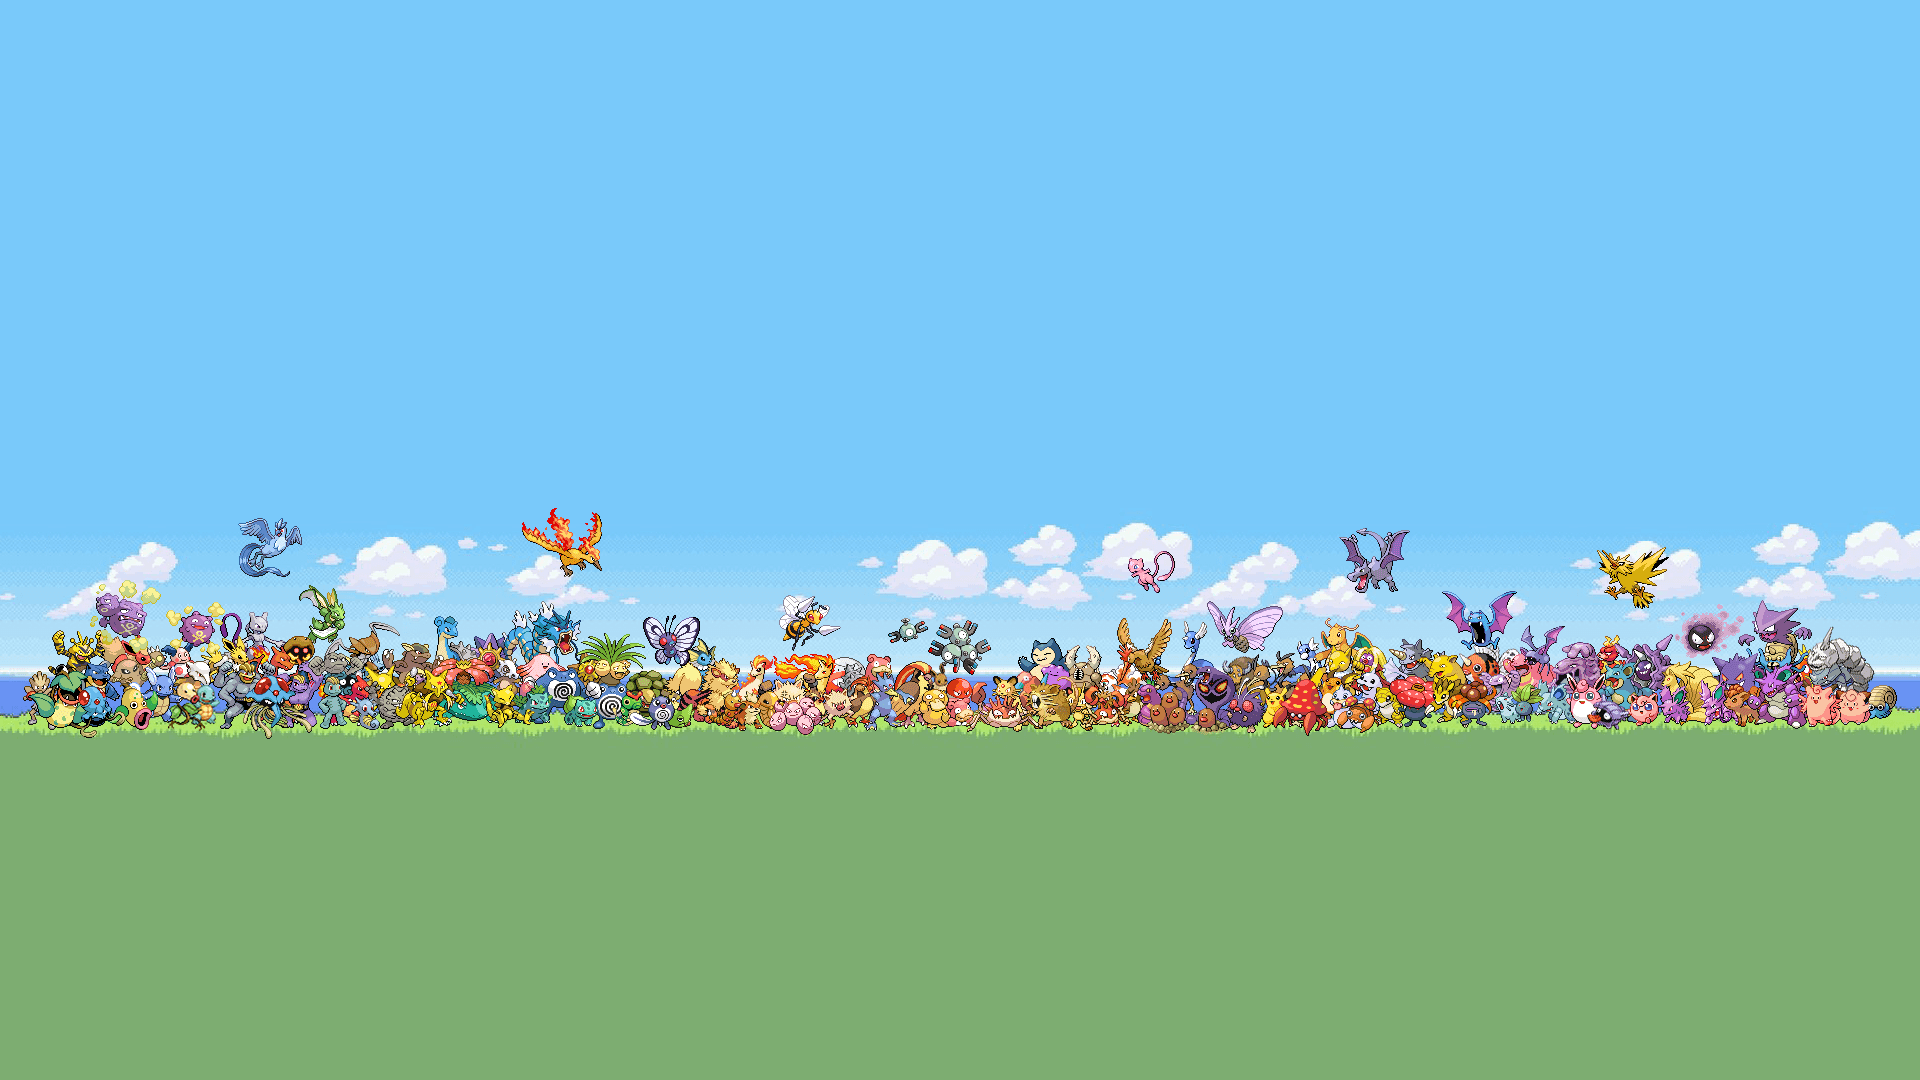 Original 151 Pokemon in one picture. Can you spot your favorite